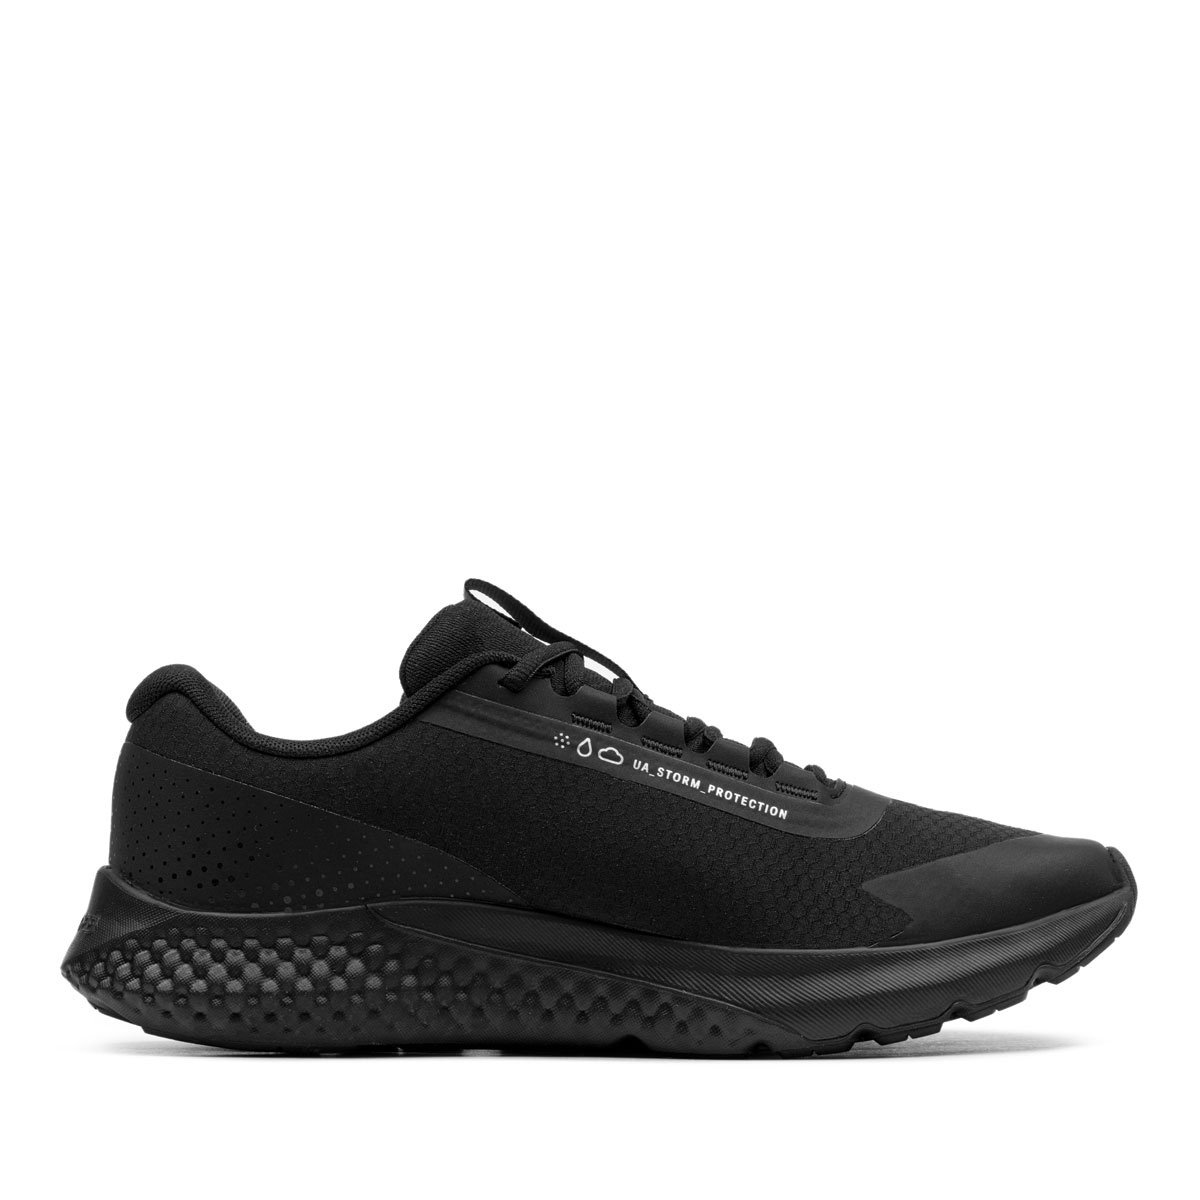 Under Armour Charged Rogue 3 Storm Мъжки маратонки 3025523-003